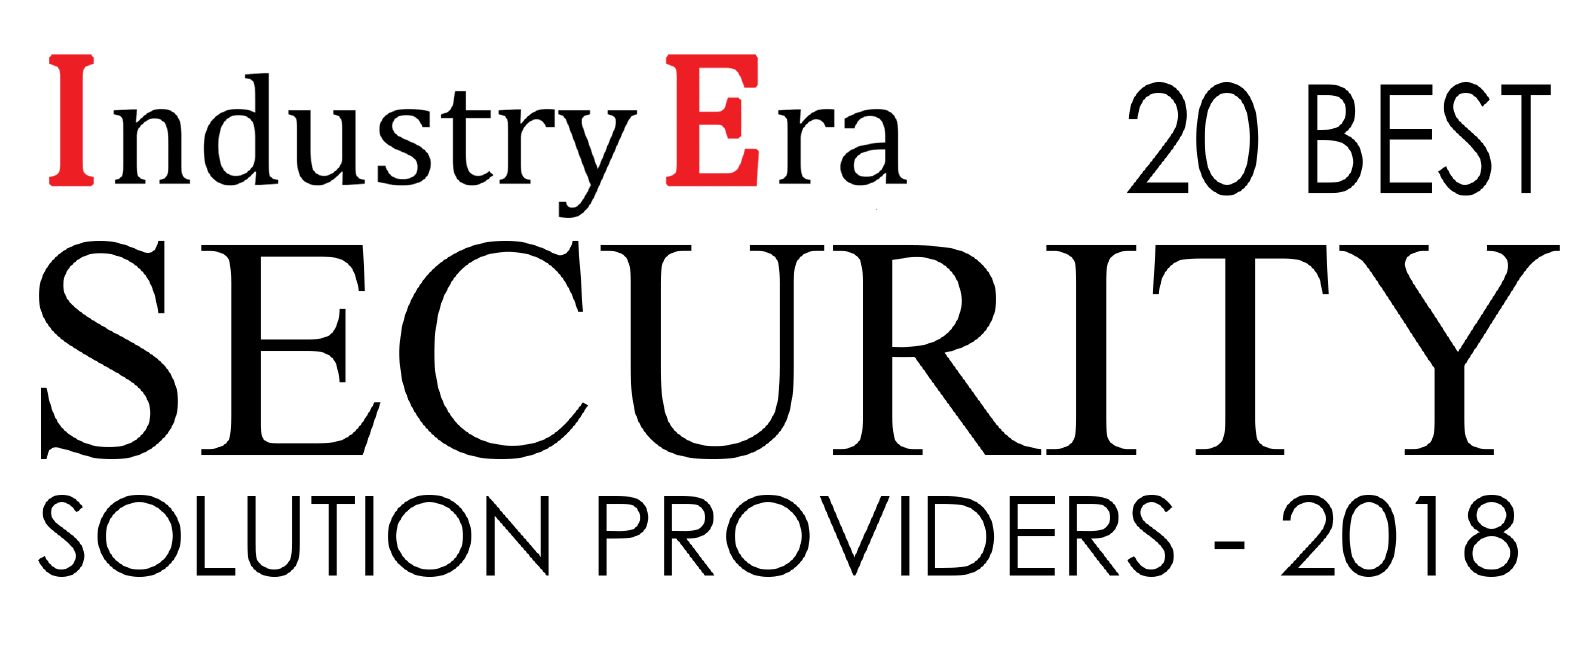 Industry Era 20 Best Security Solution Providers 2018